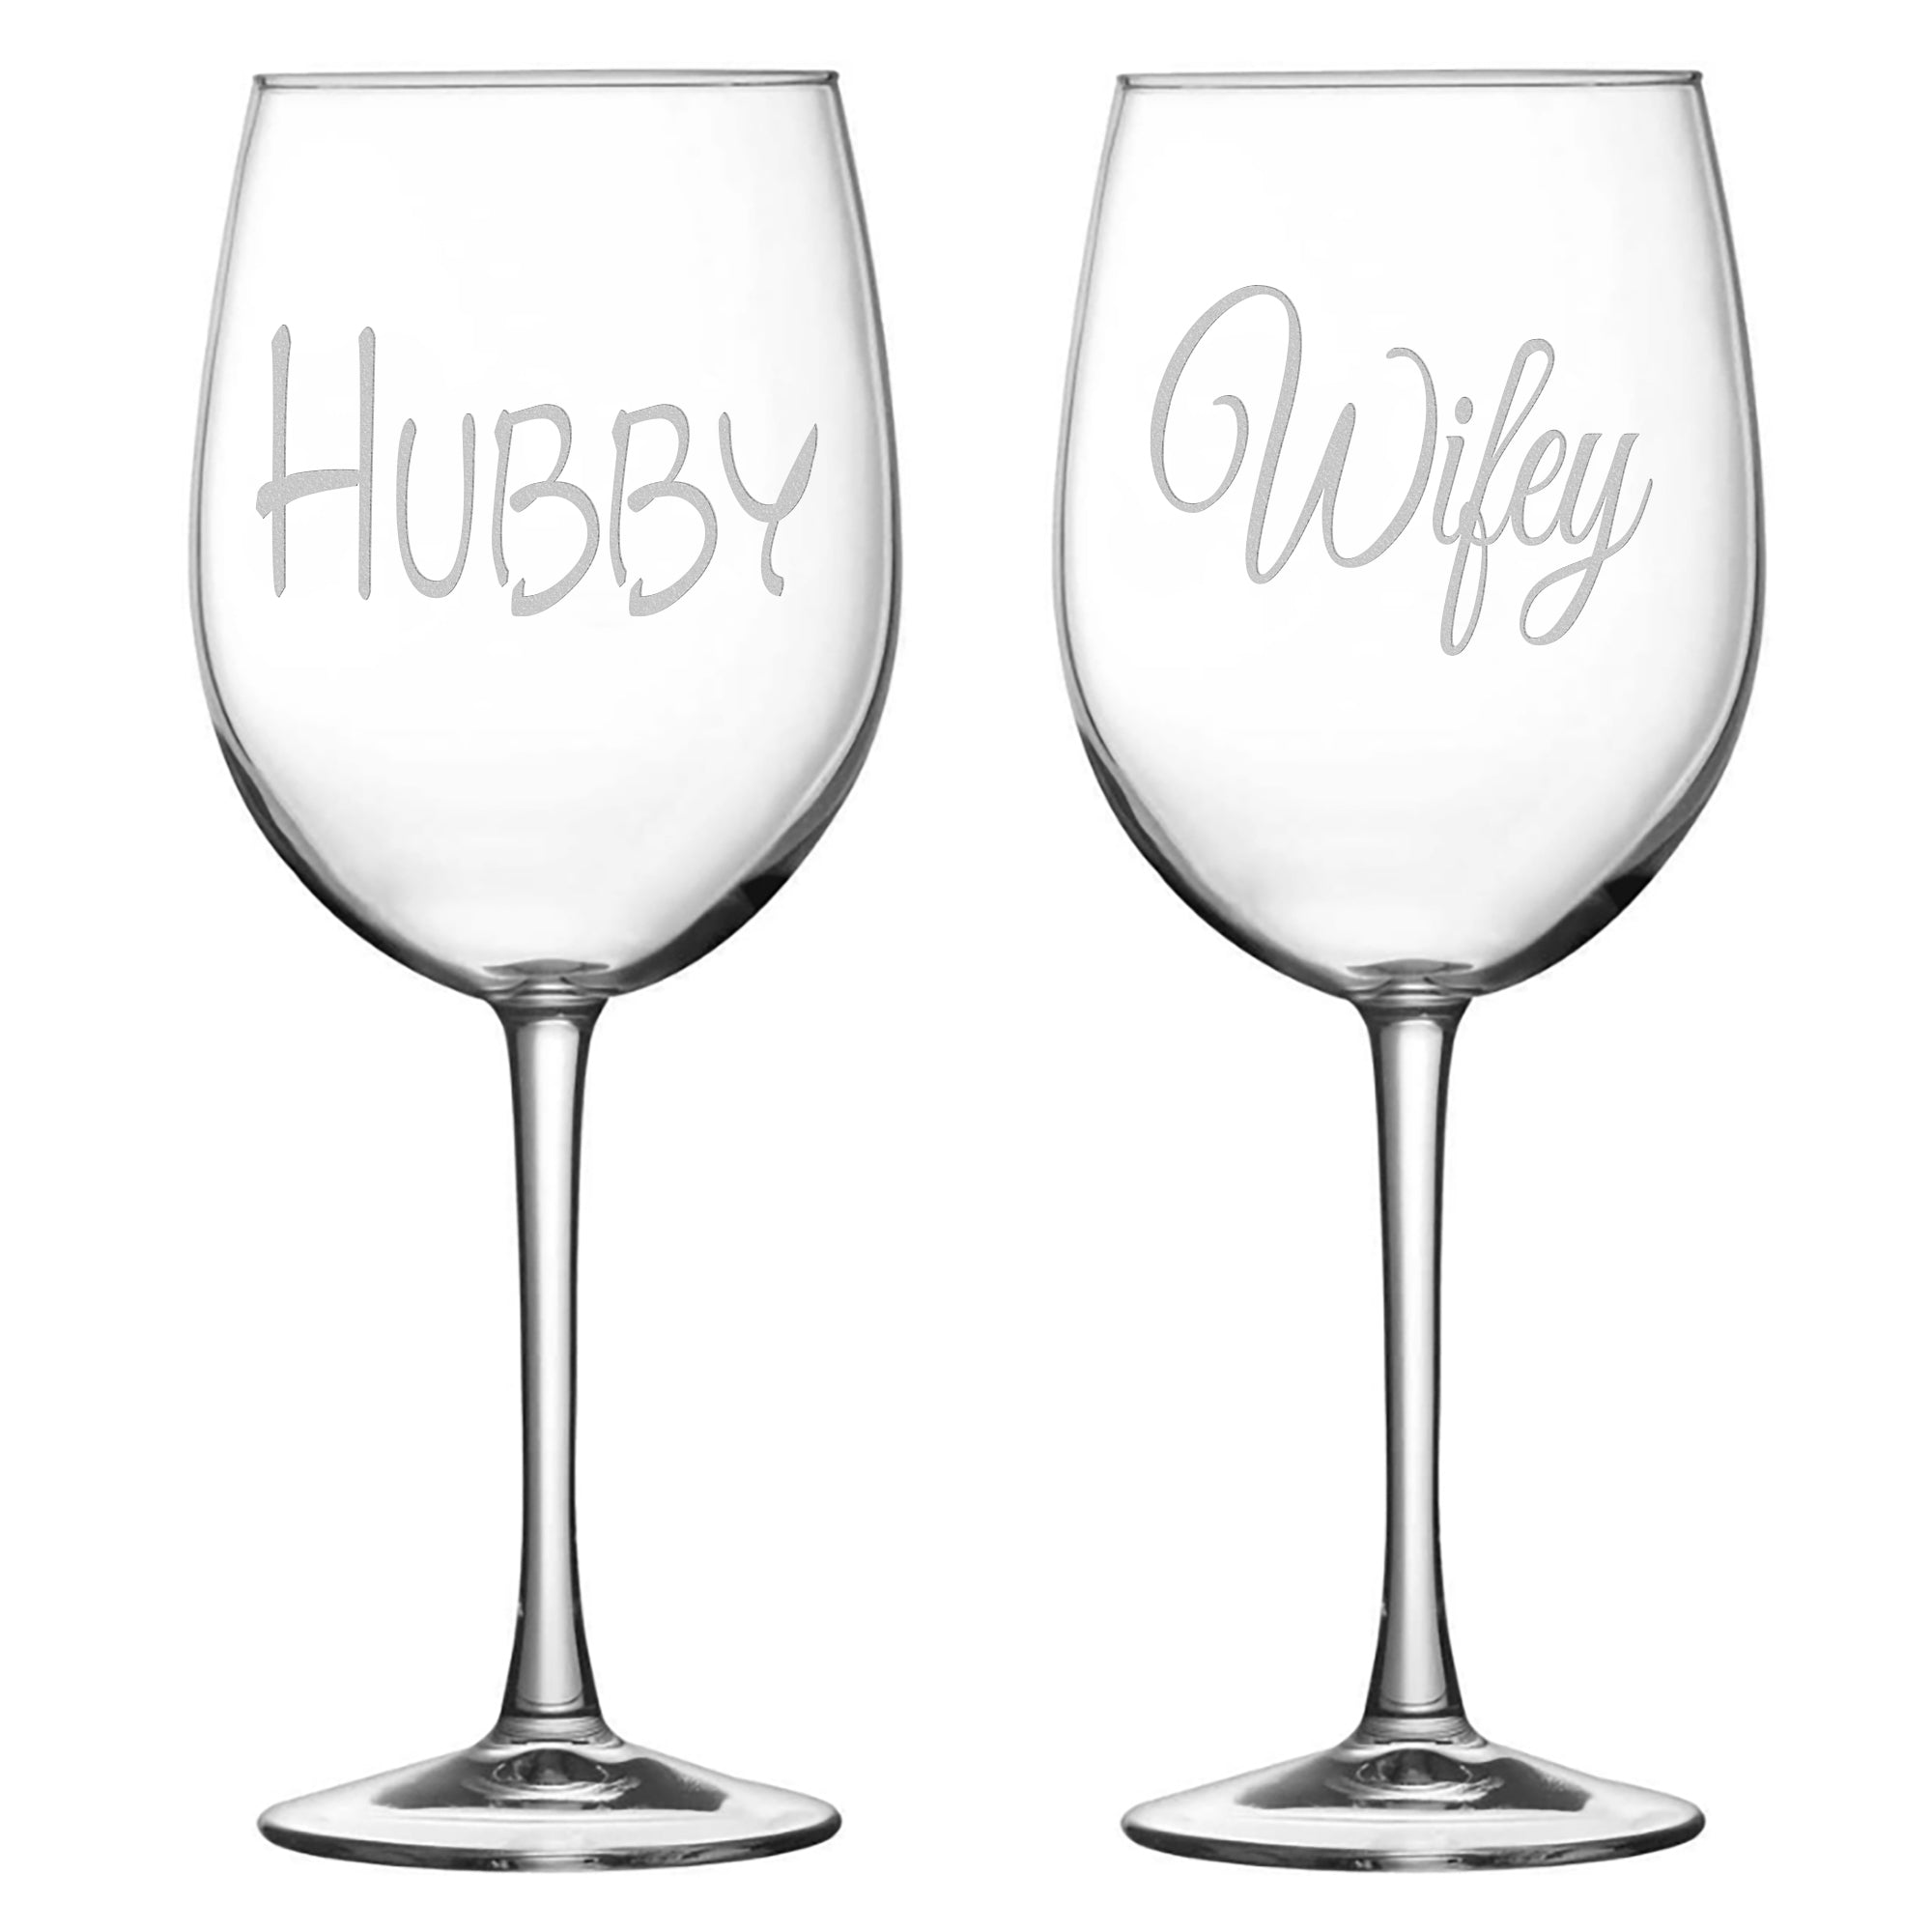 Integrity Bottles Hubby Wifey, (Set of 2) Stemmed Wine Glasses, Handmade, Handblown, Hand Etched Gifts, Sand Carved, 16oz